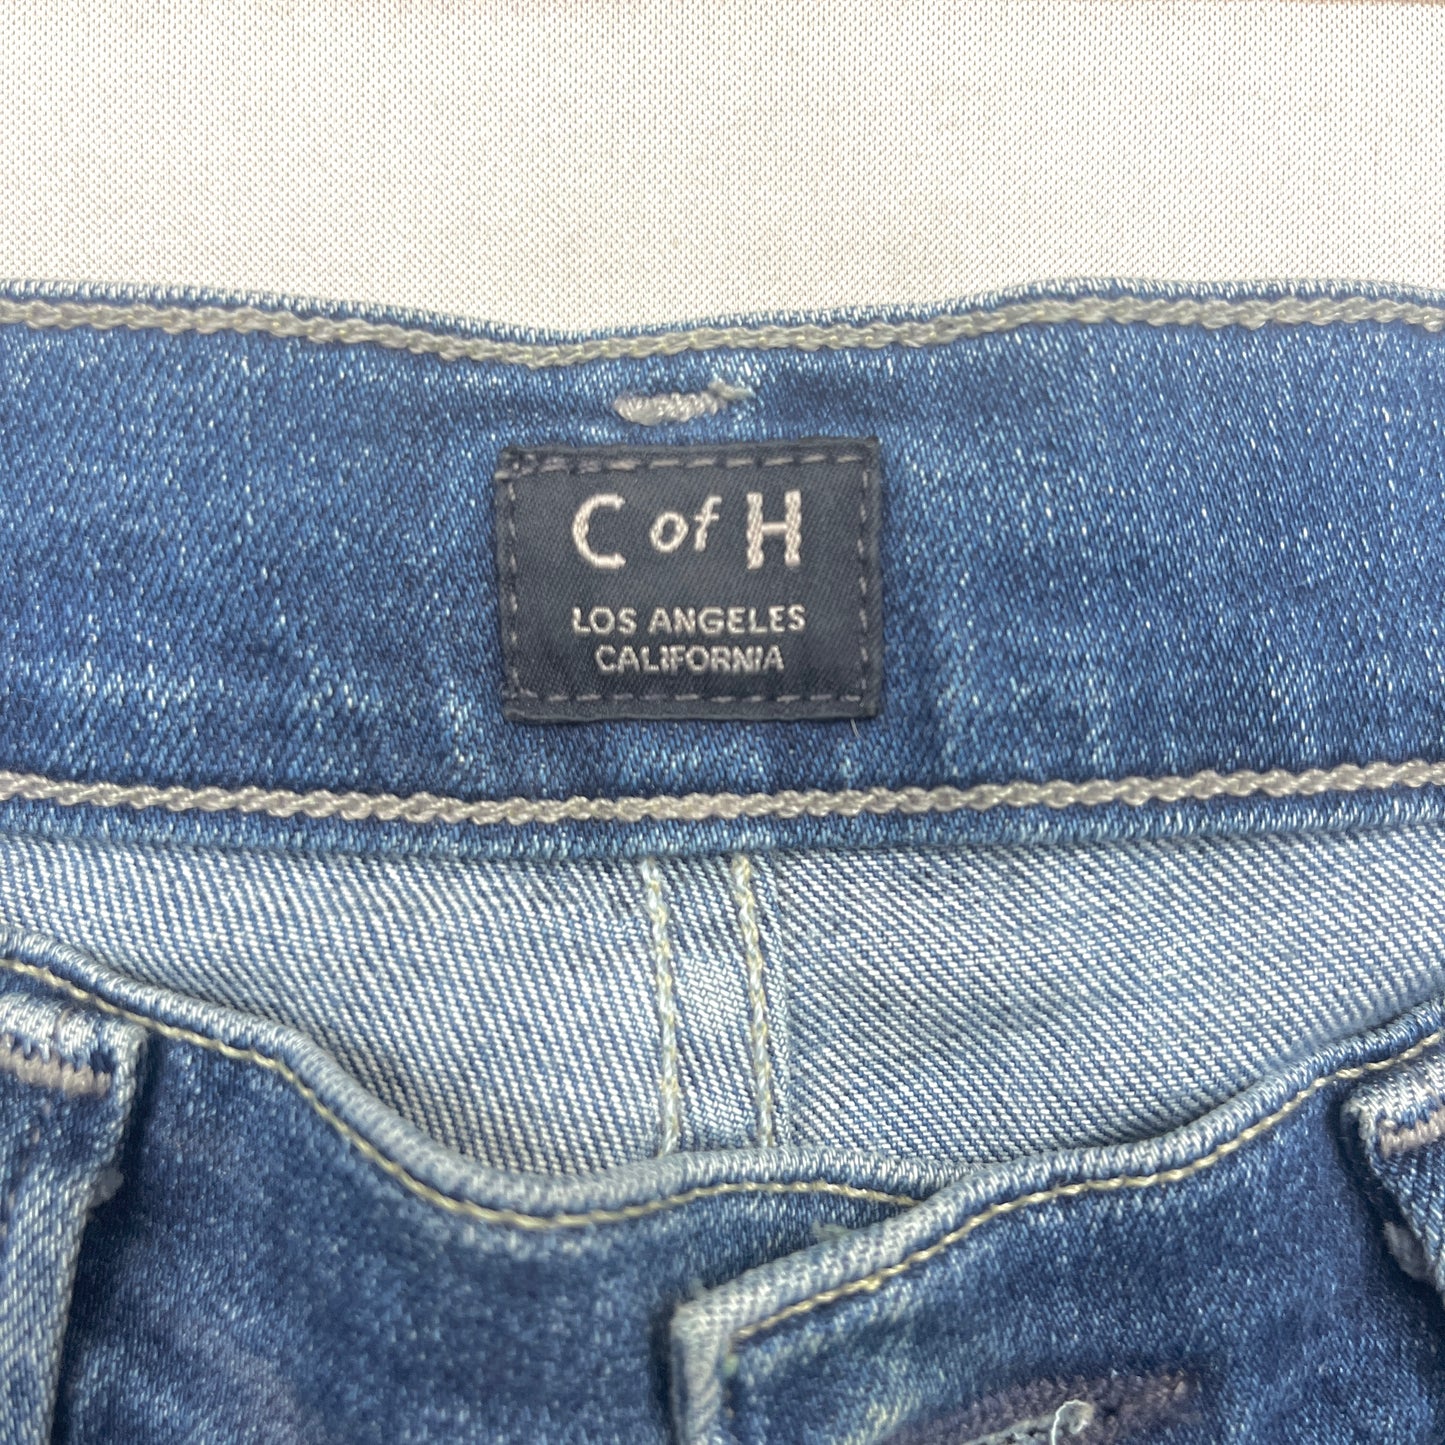 Jeans Skinny By Citizens Of Humanity  Size: 4